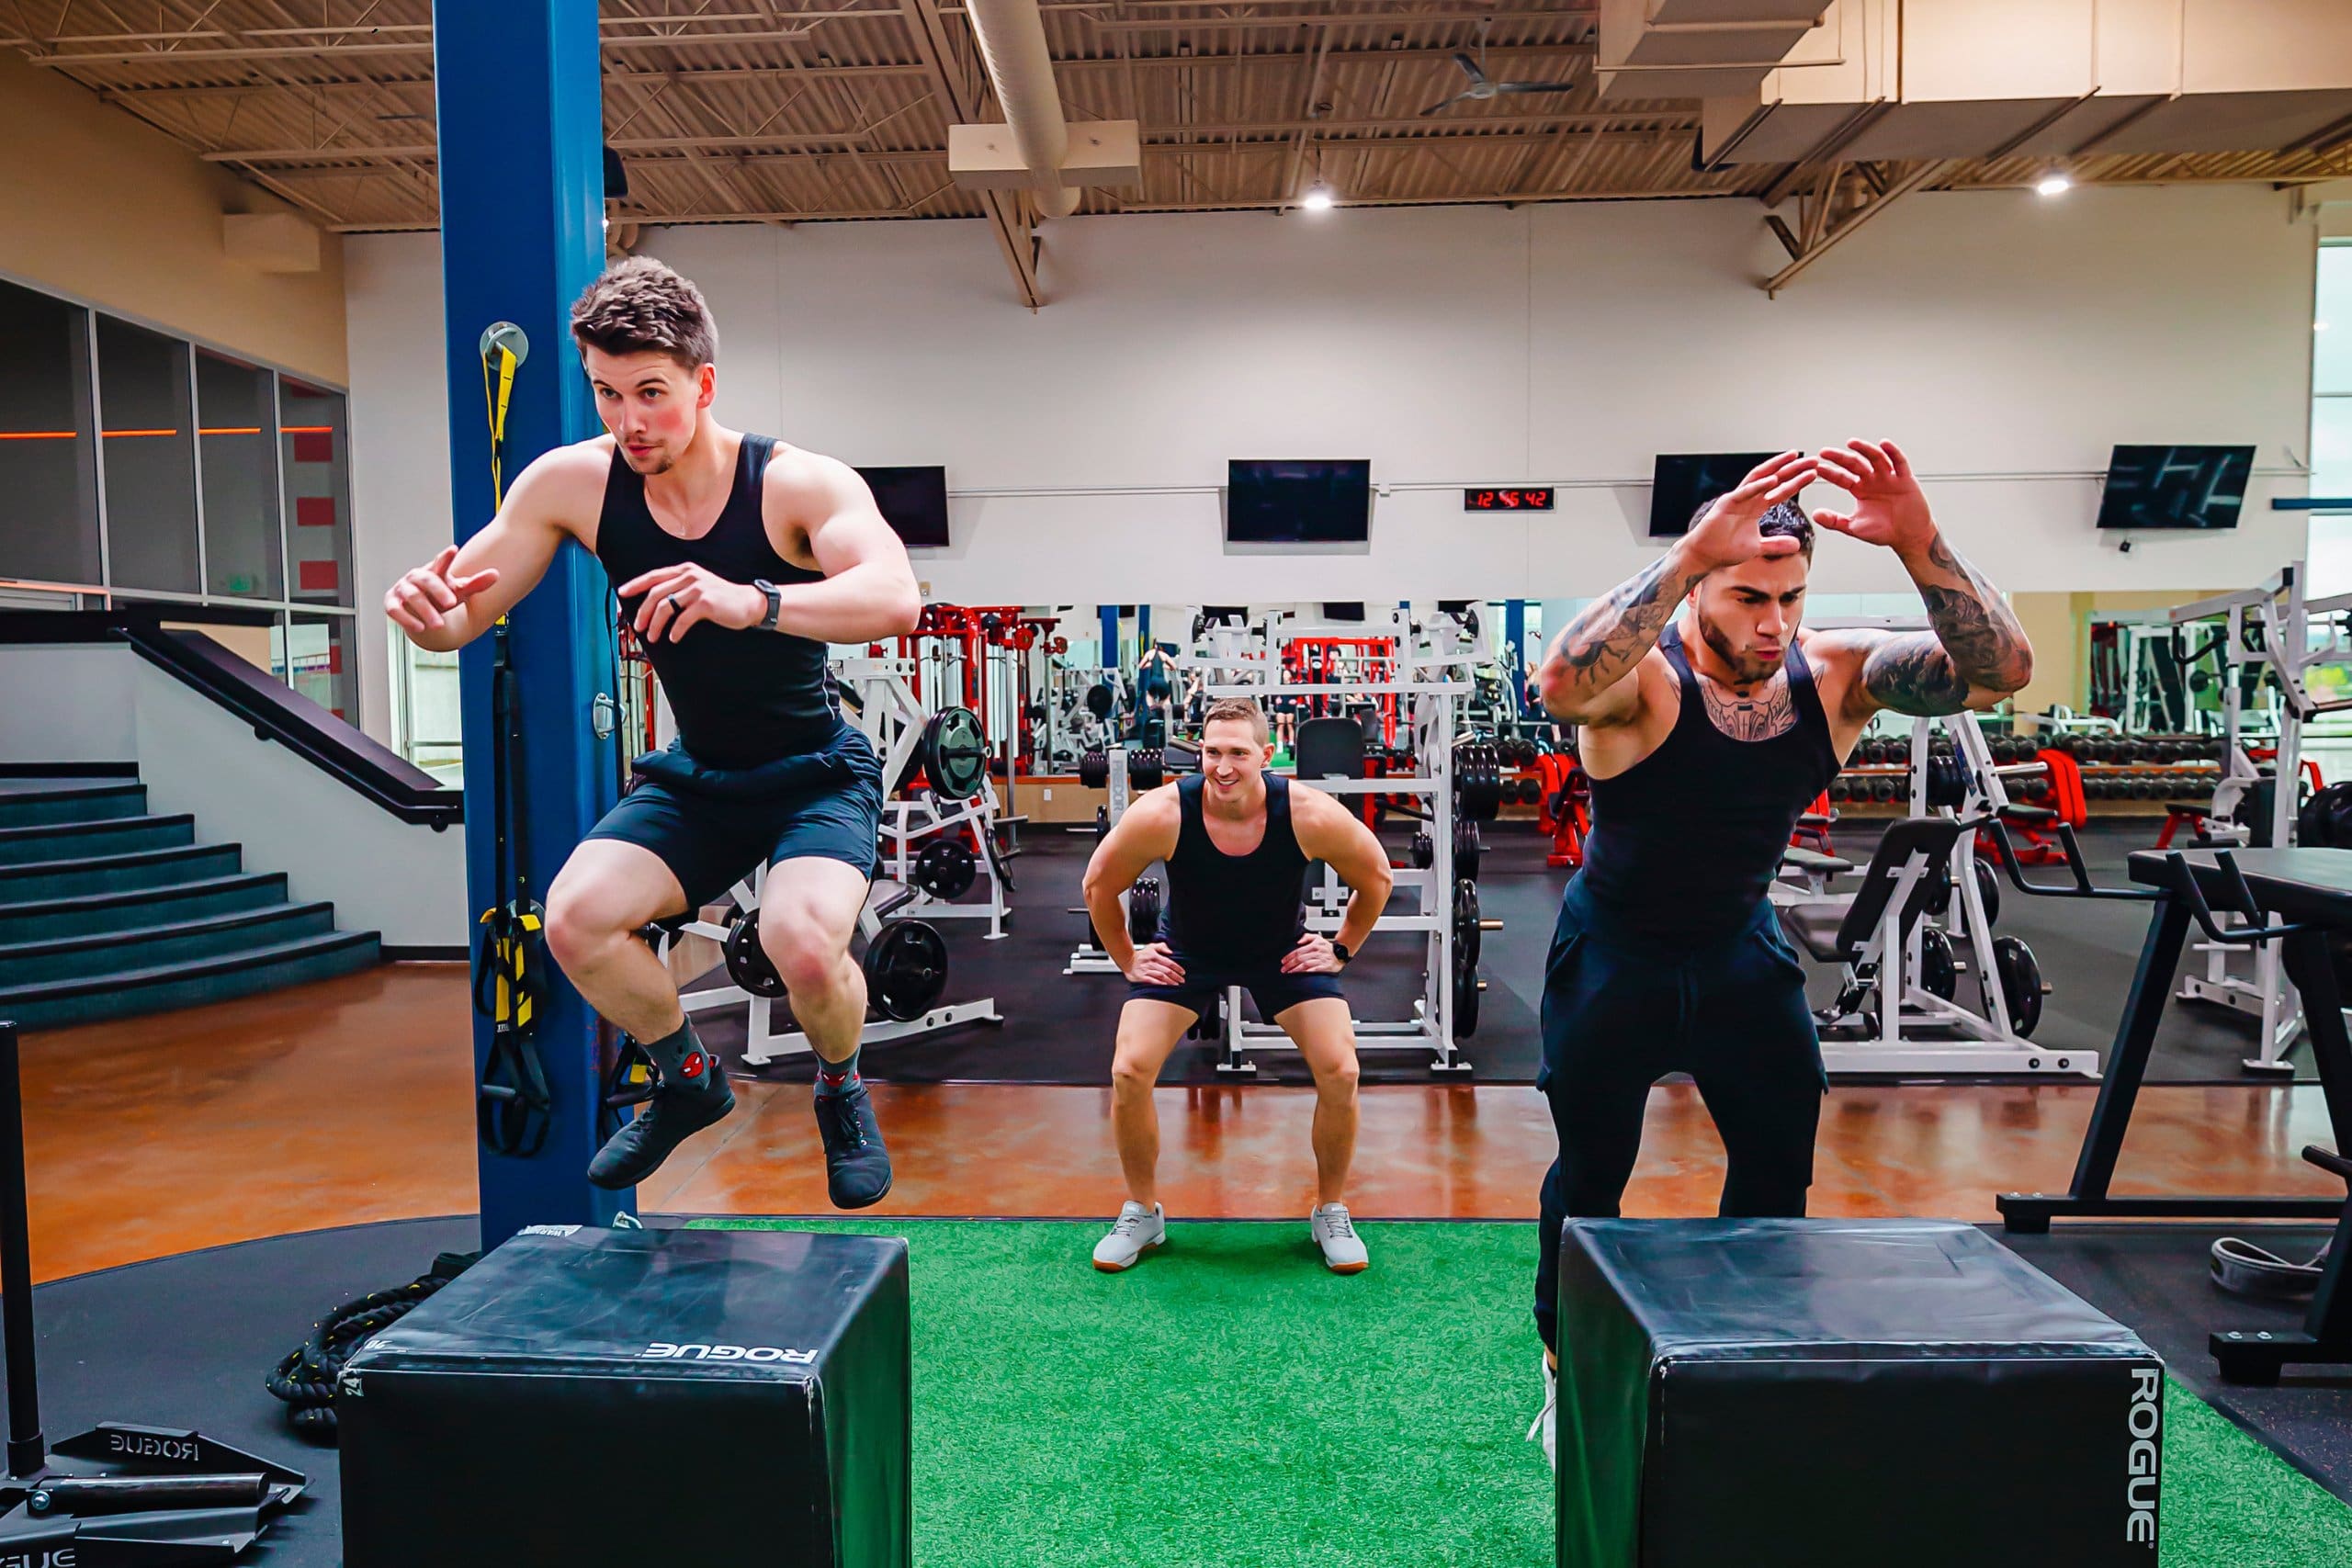 small group training at pursuit fitness gym in monroe with box jumping and functional fitness